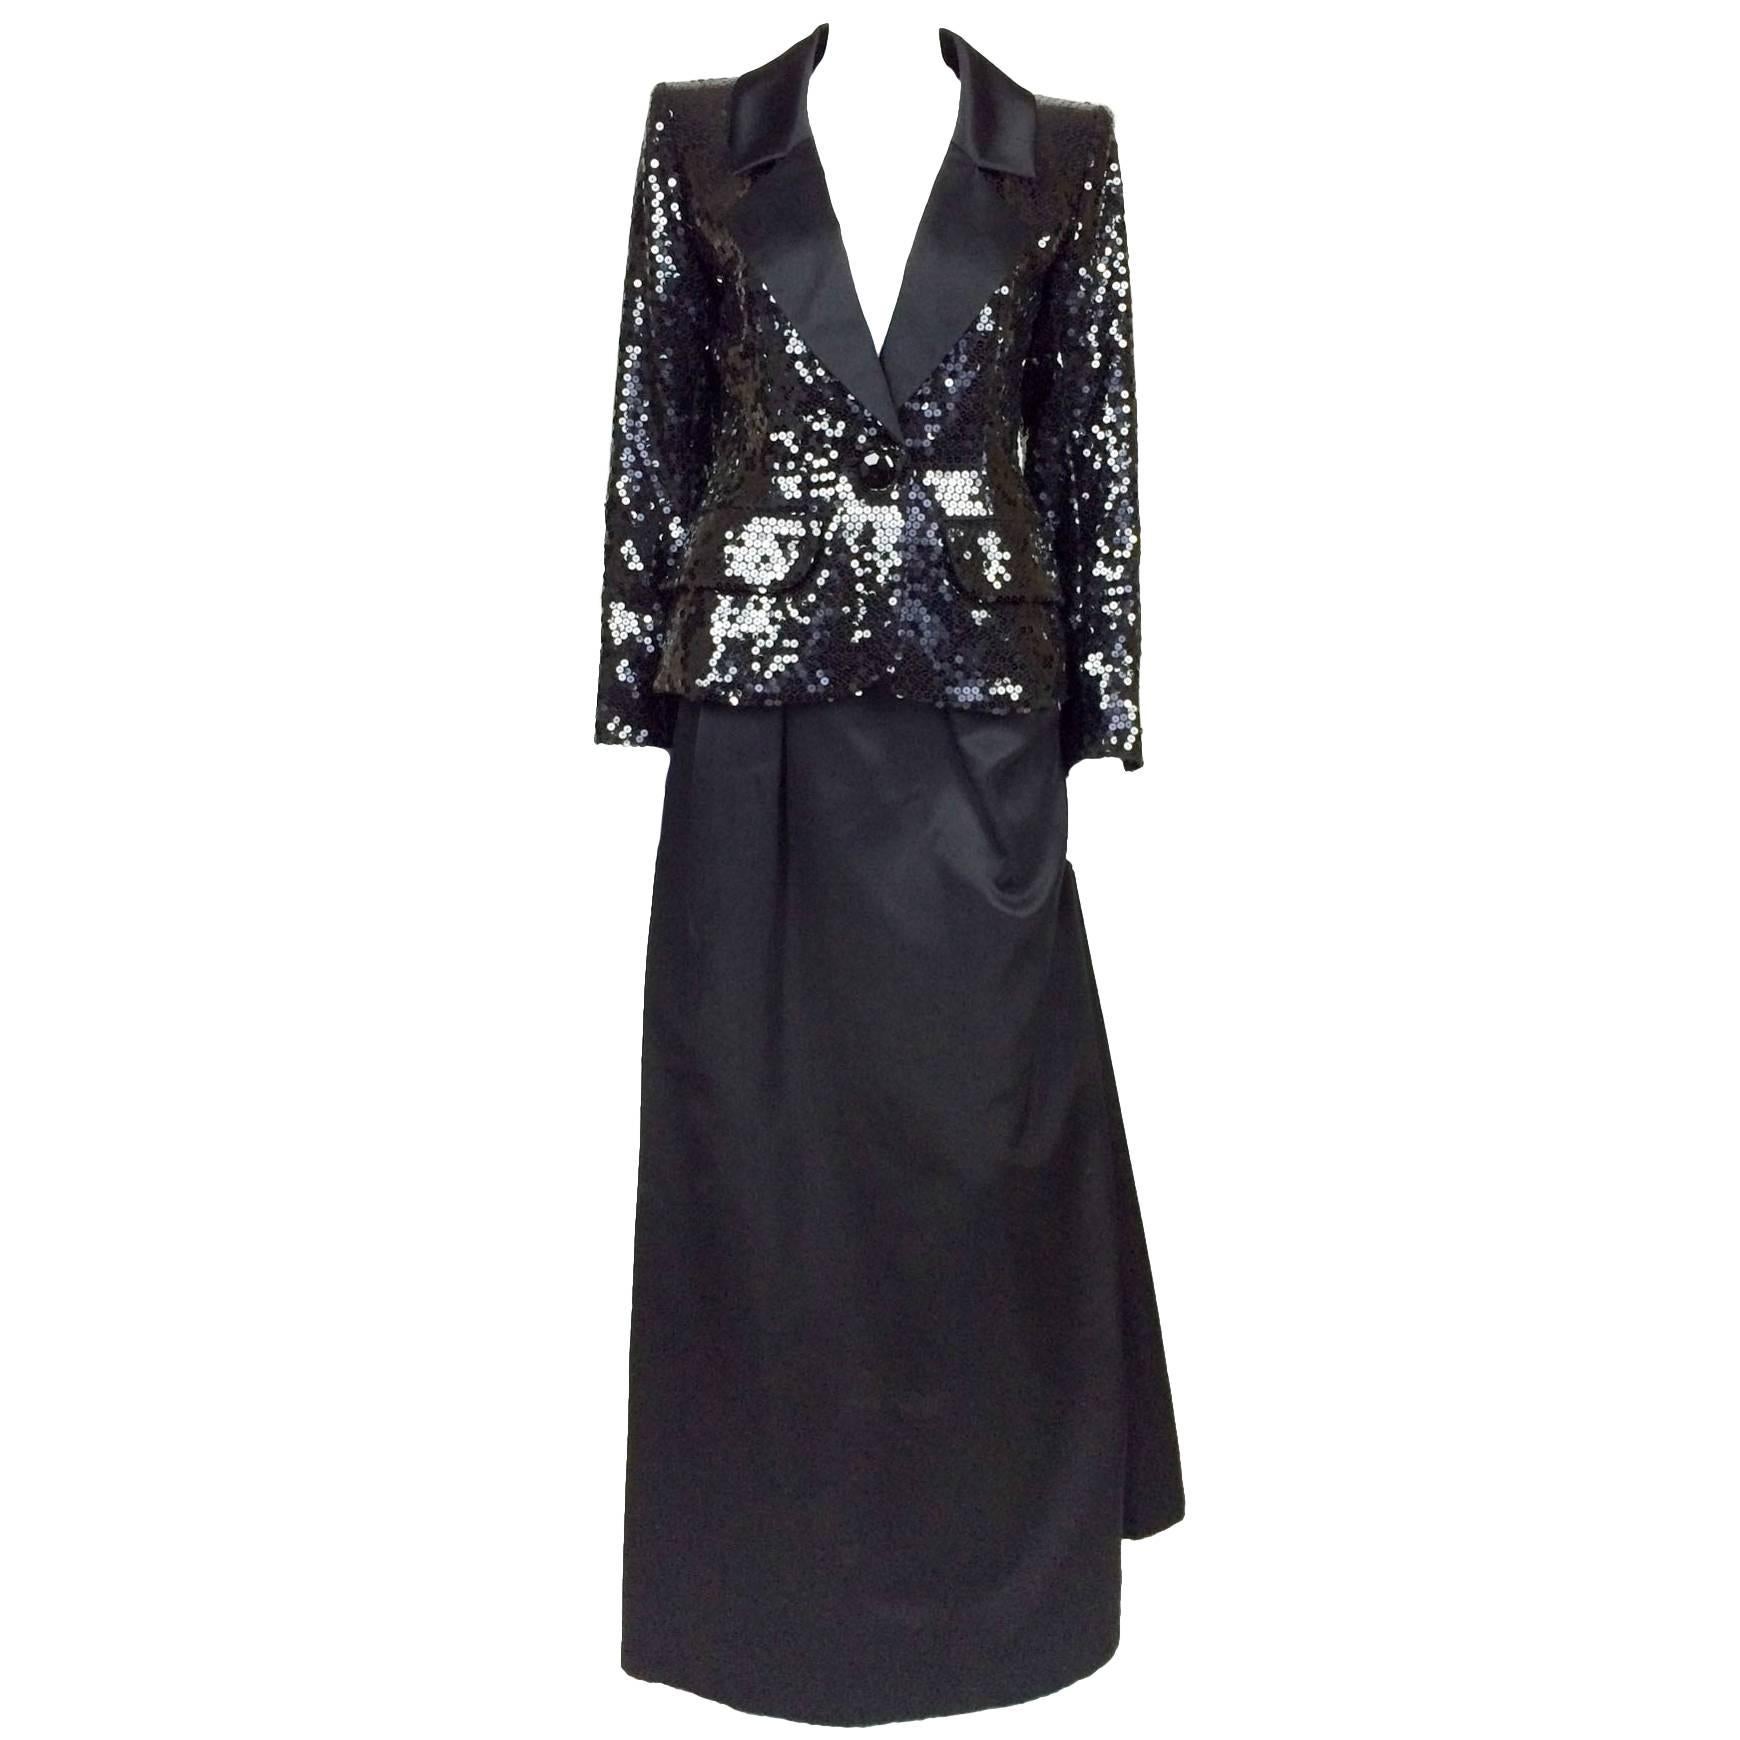 Yves Saint Laurent Le Smoking Sequin Jacket, Long and Short Satin Skirts - 1980 For Sale